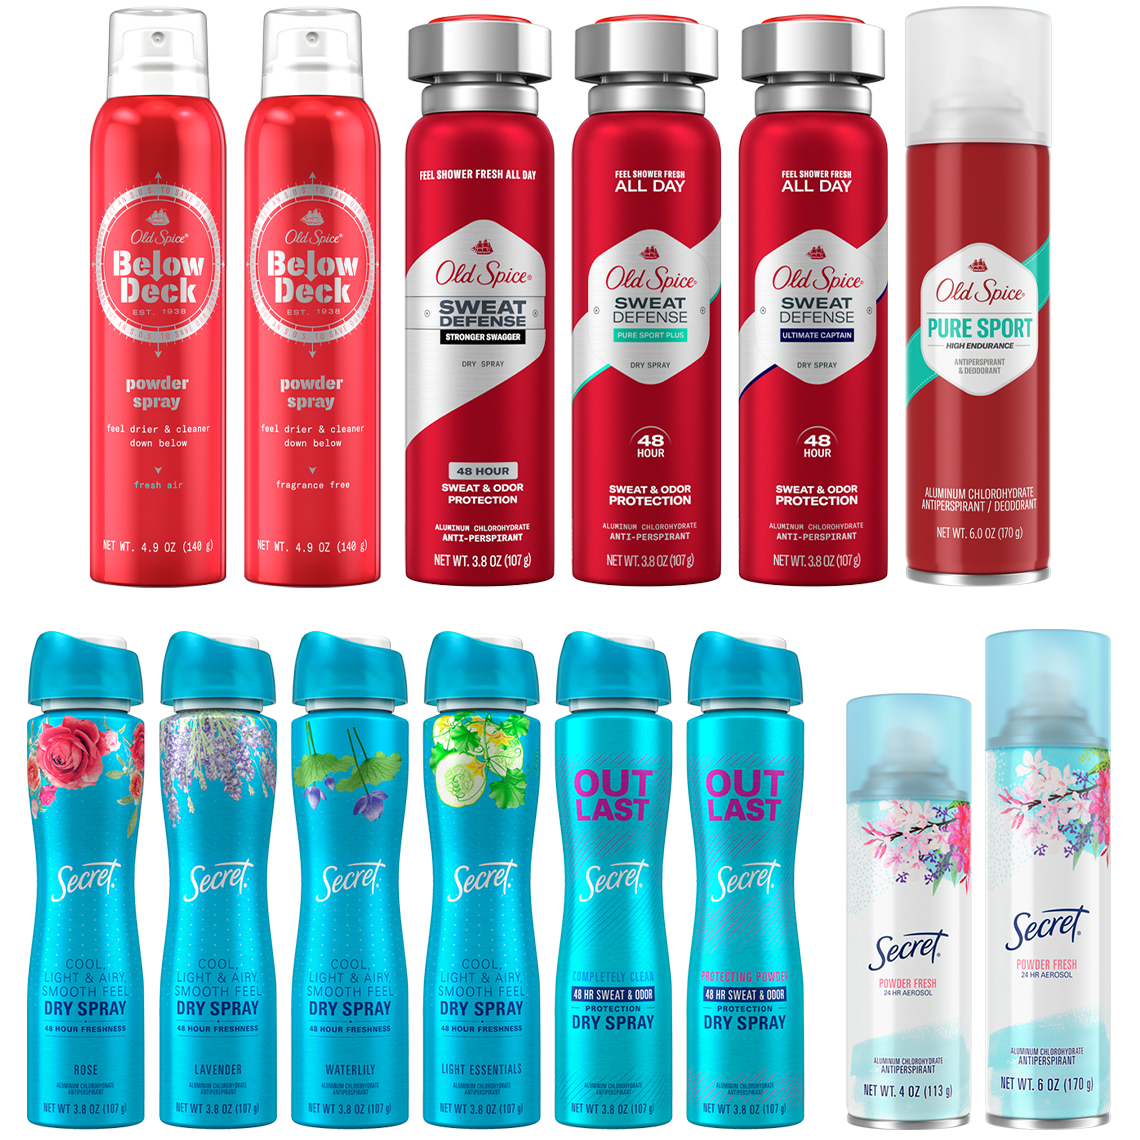 old spice and secret brand spray deodorants with an active recall are shown